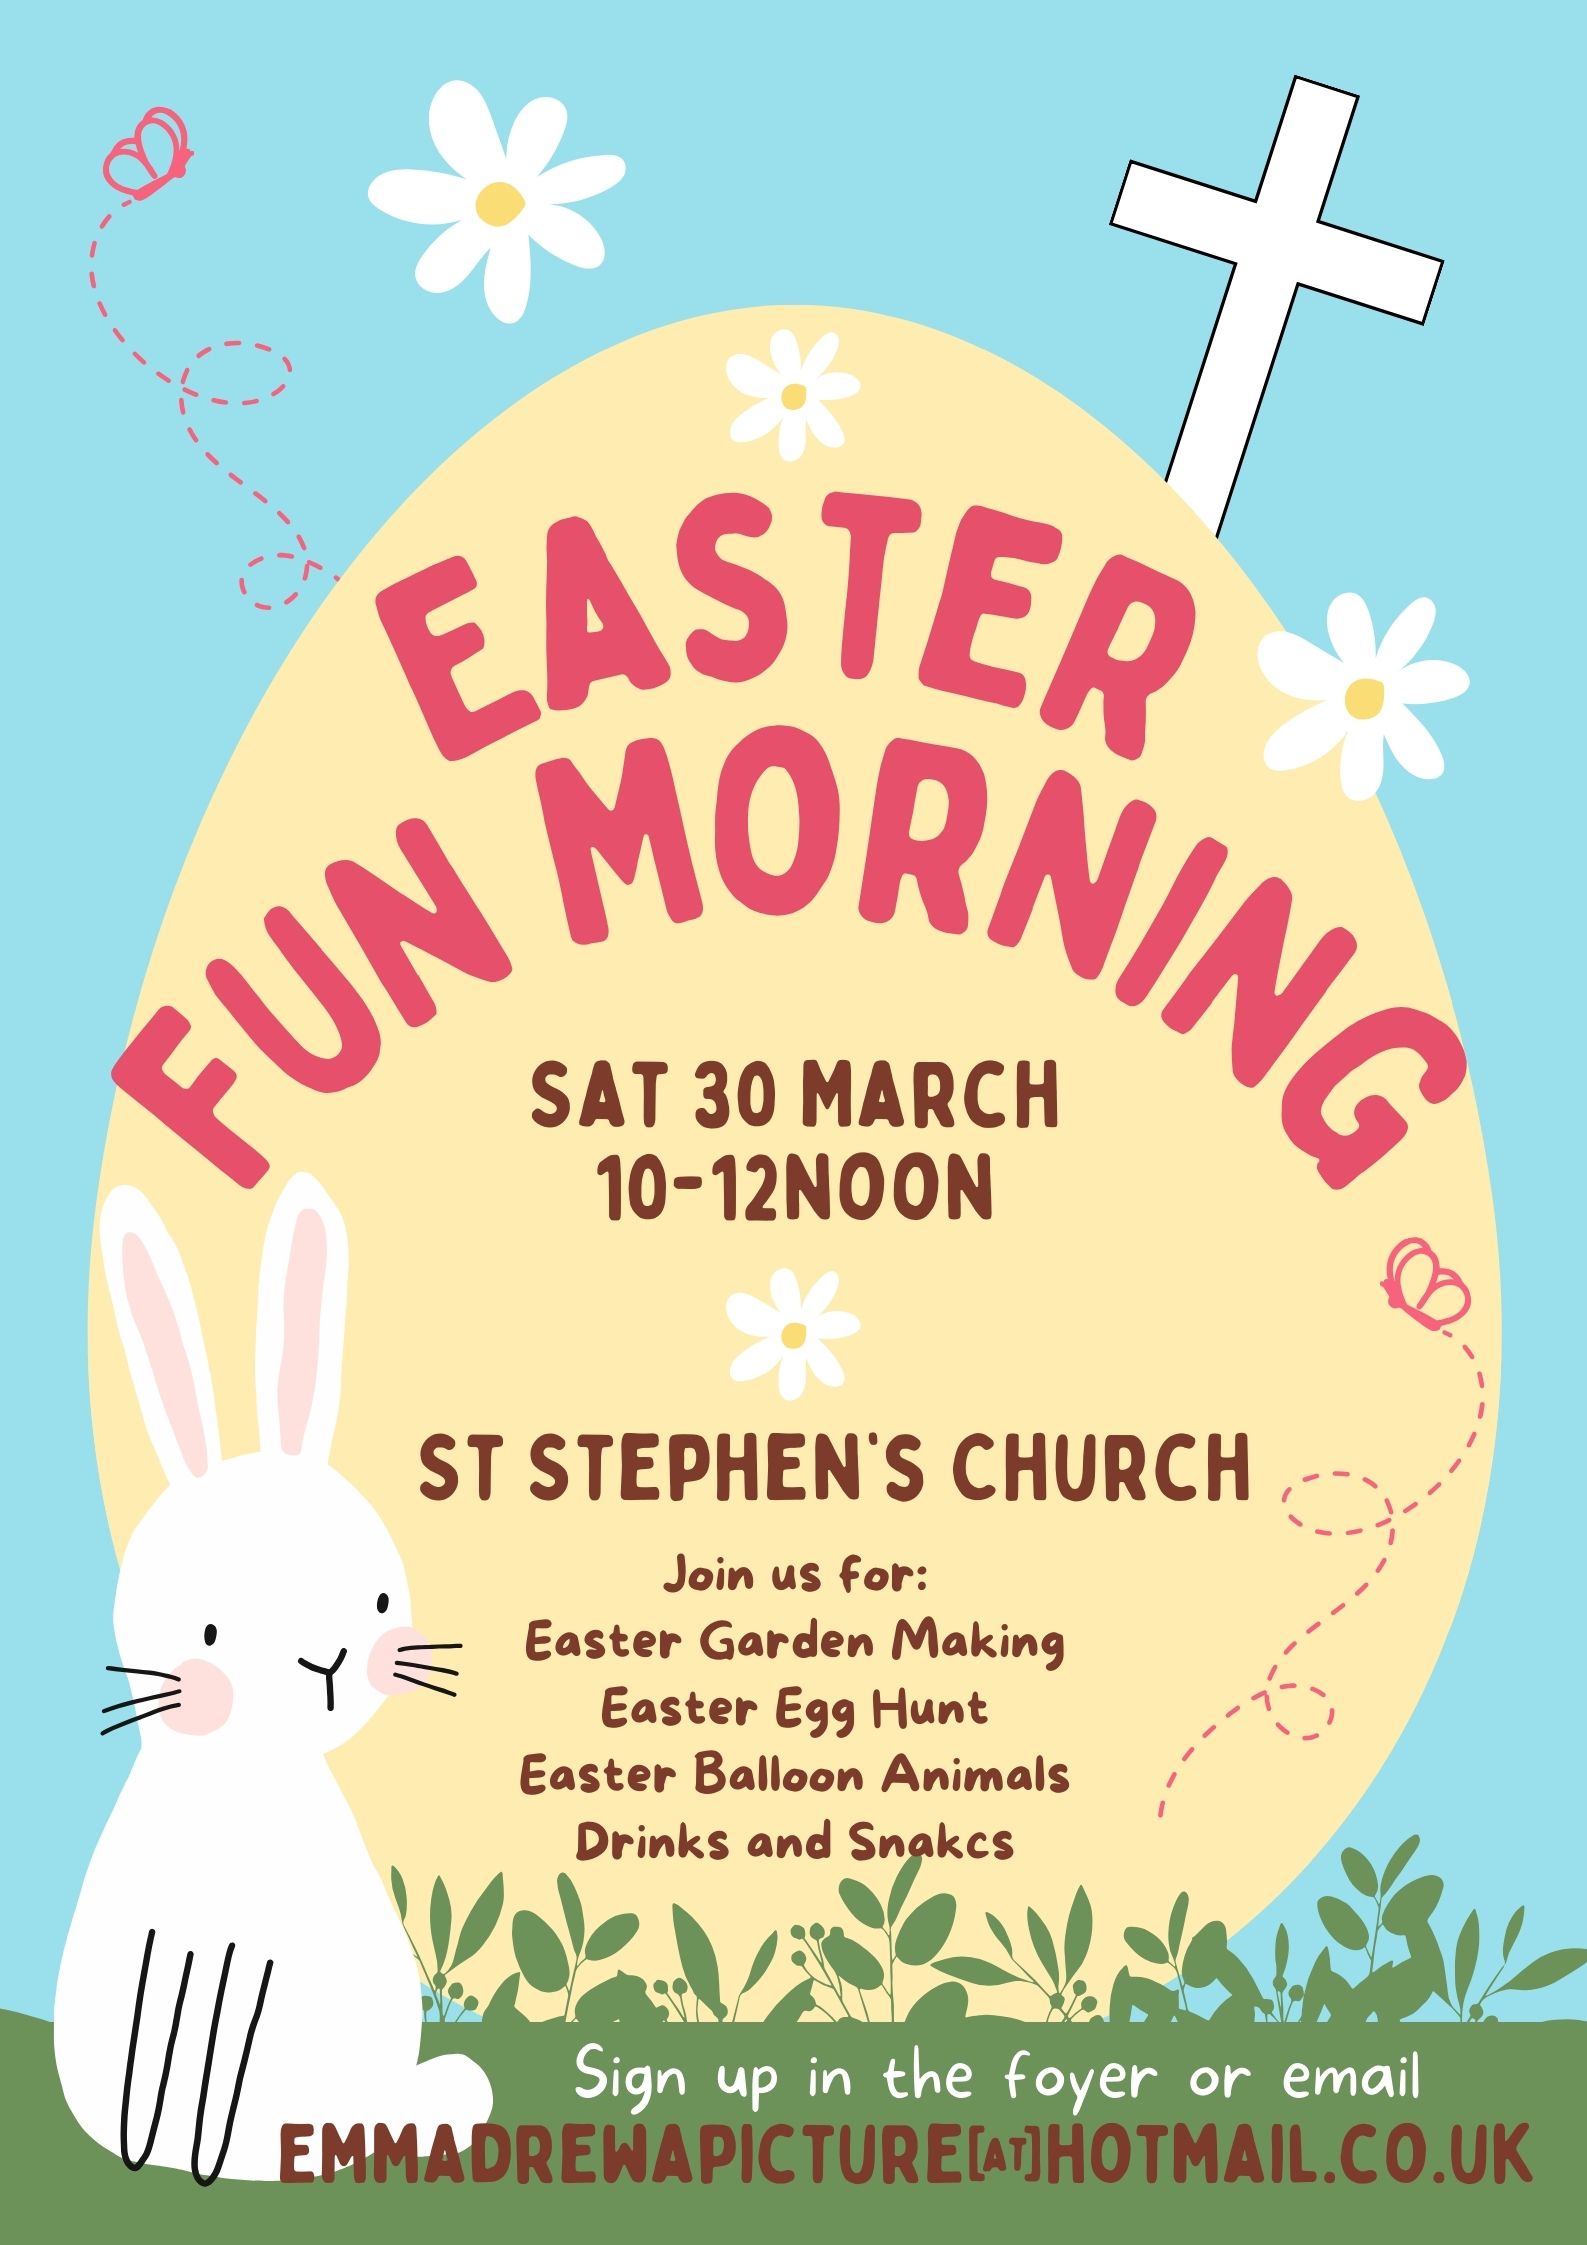 A poster advertising a morning of Easter fun for children on Holy Saturday